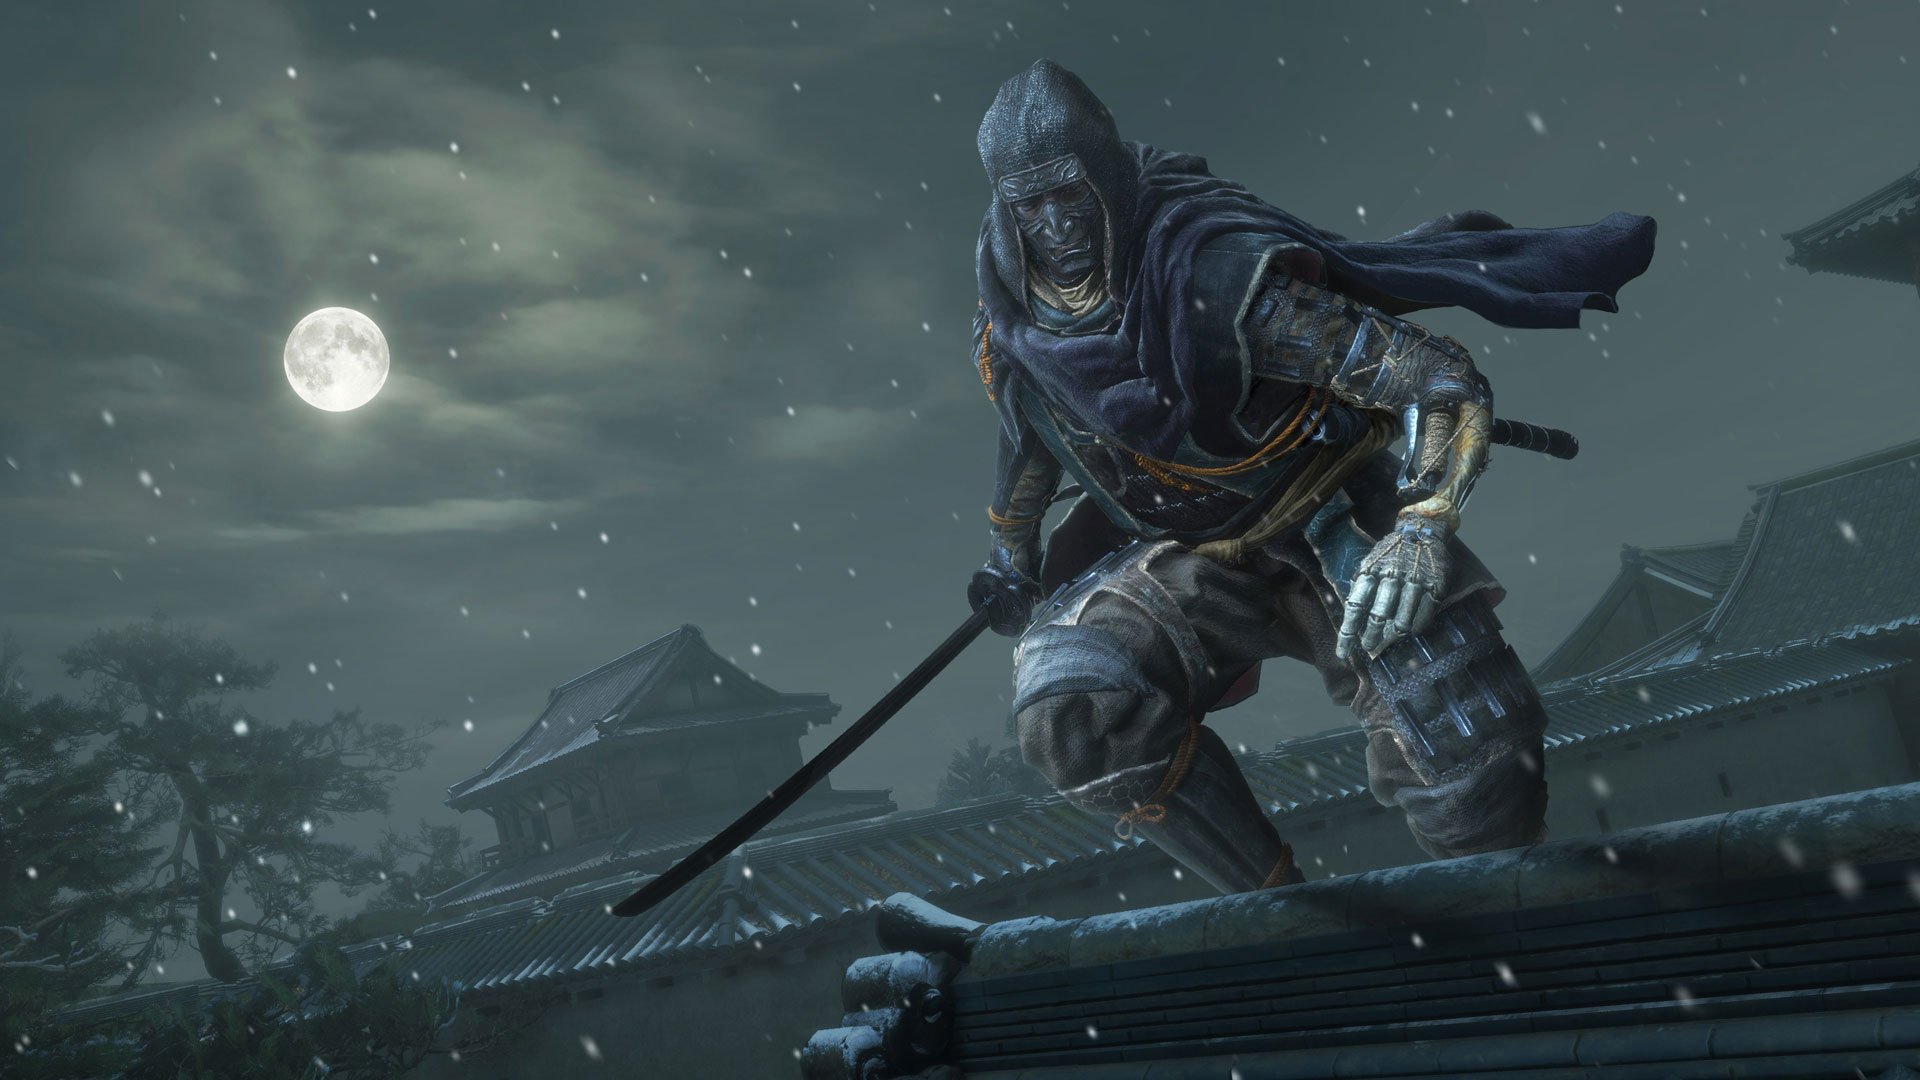 Sekiro: Shadows Die Twice gets an additional features update on October